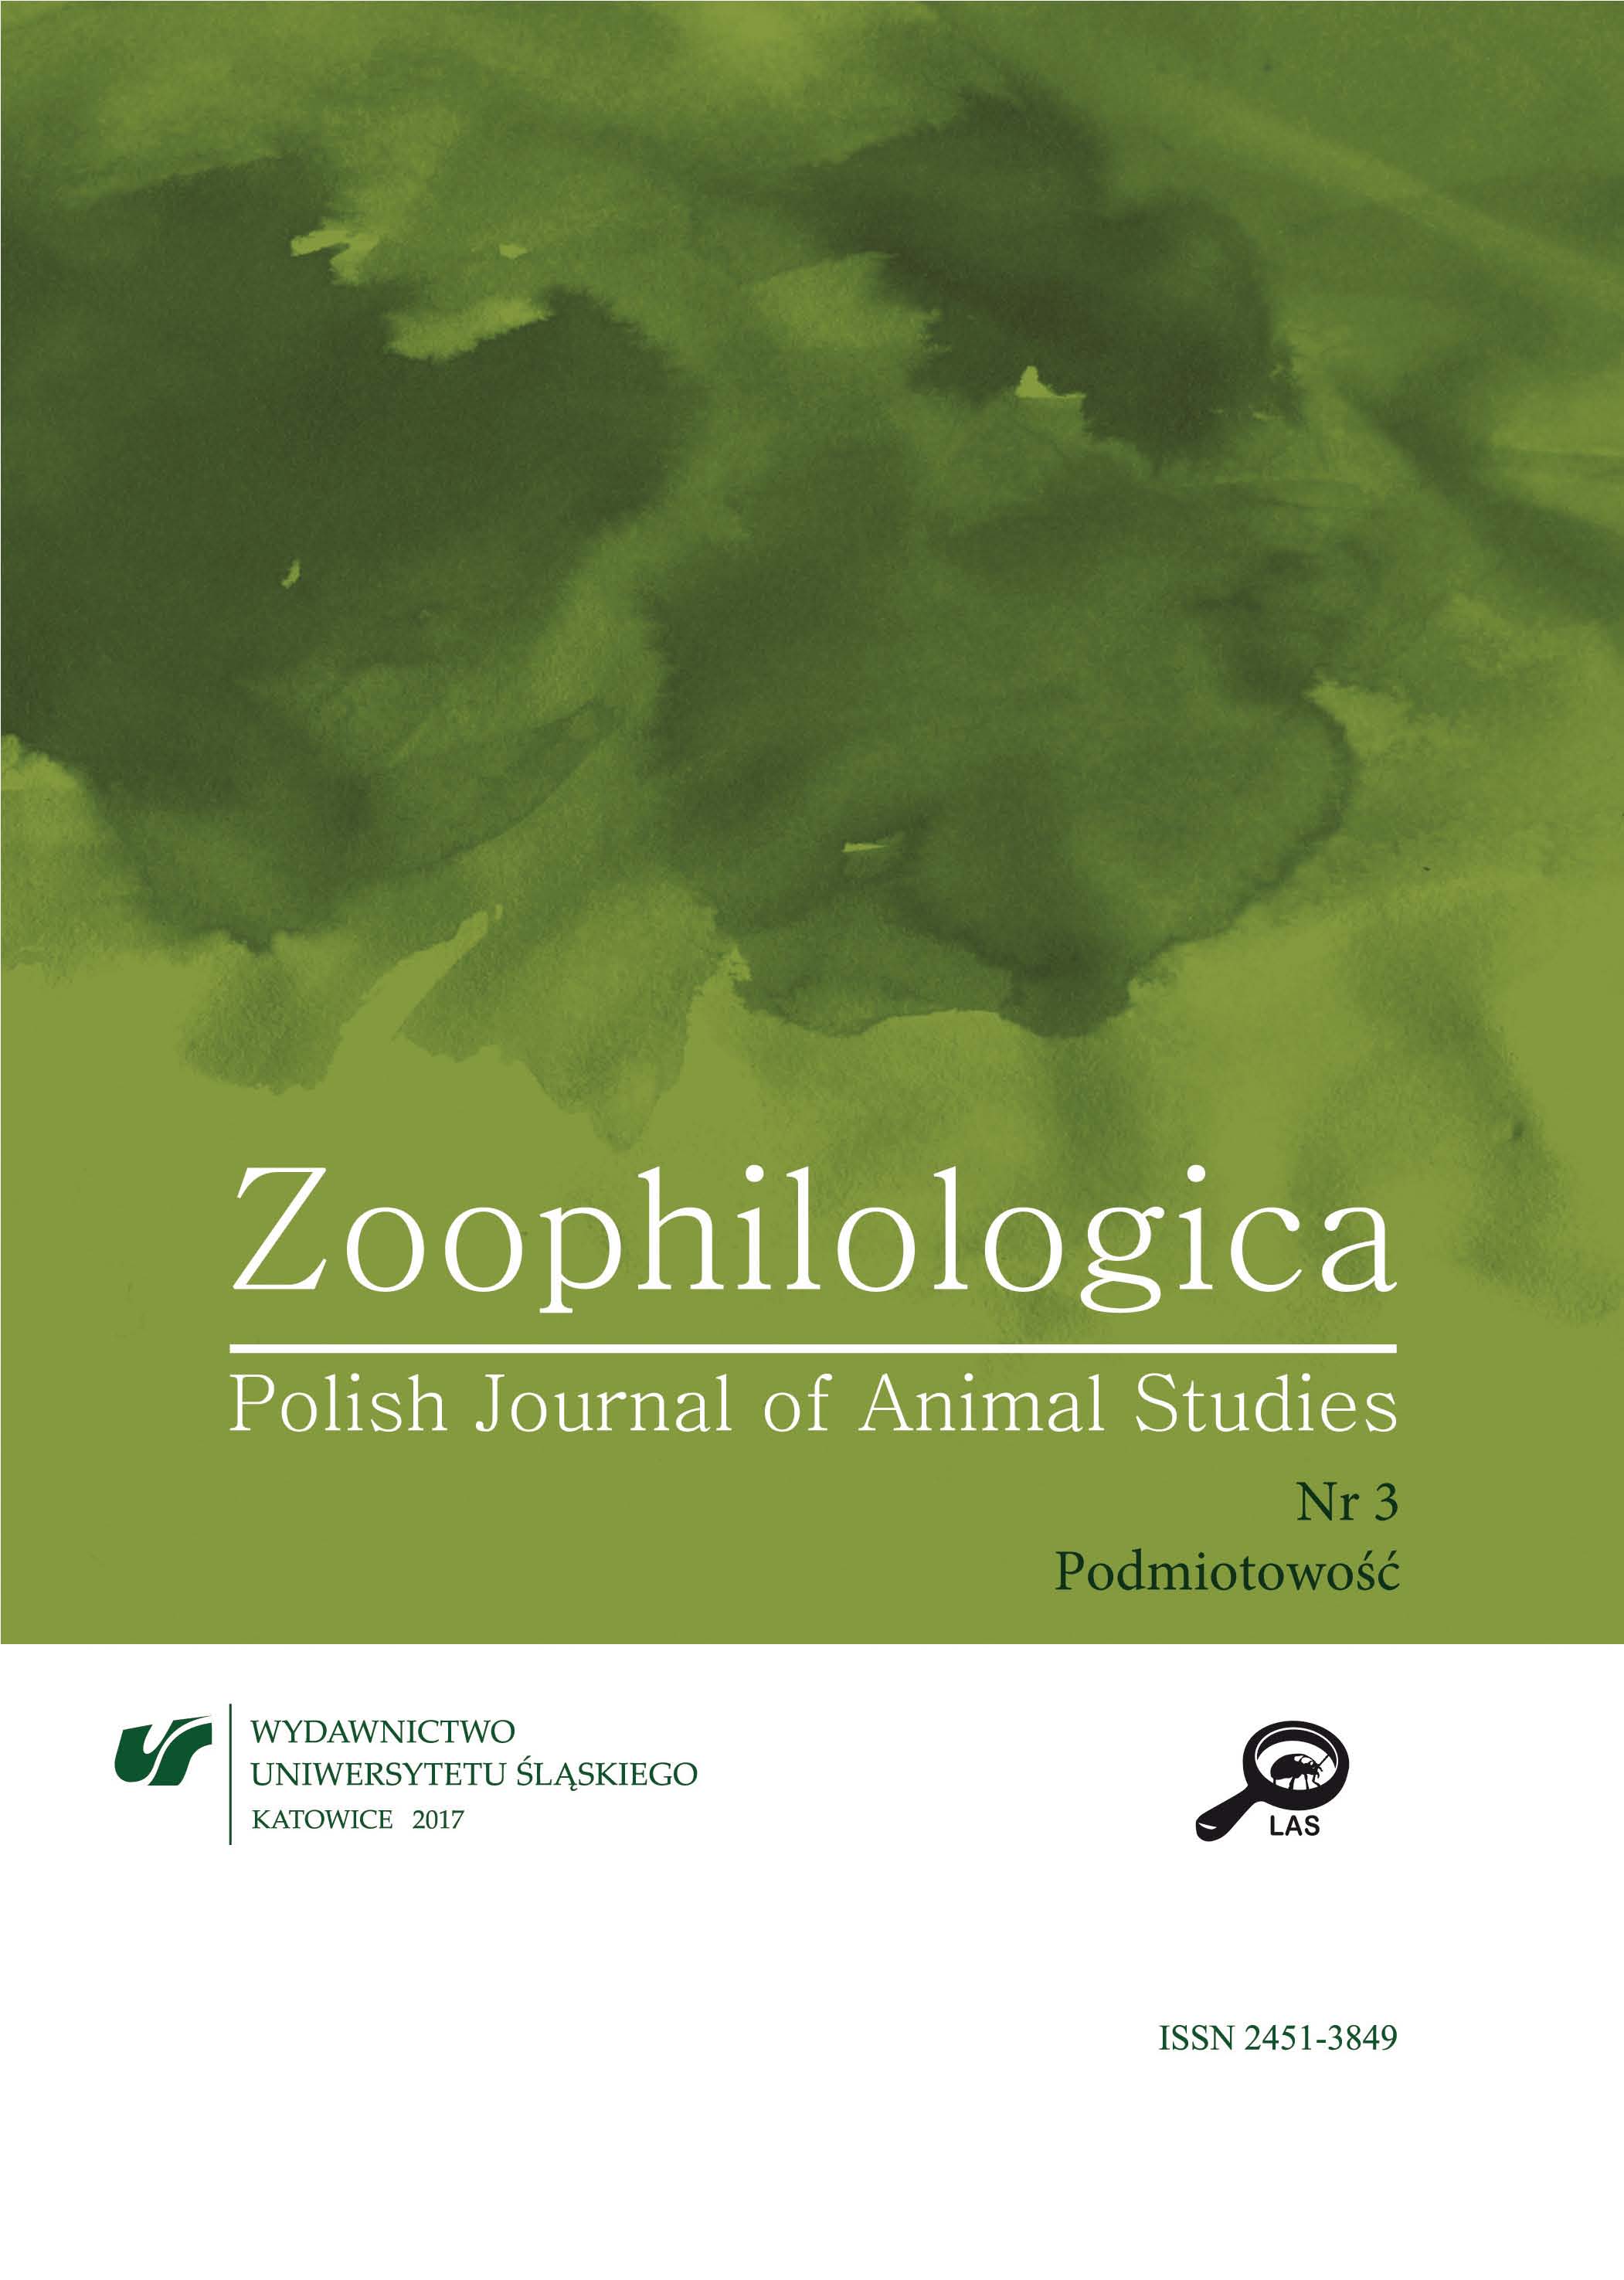 European Philosophy and Its Negative Impact on the Treatment of Animals